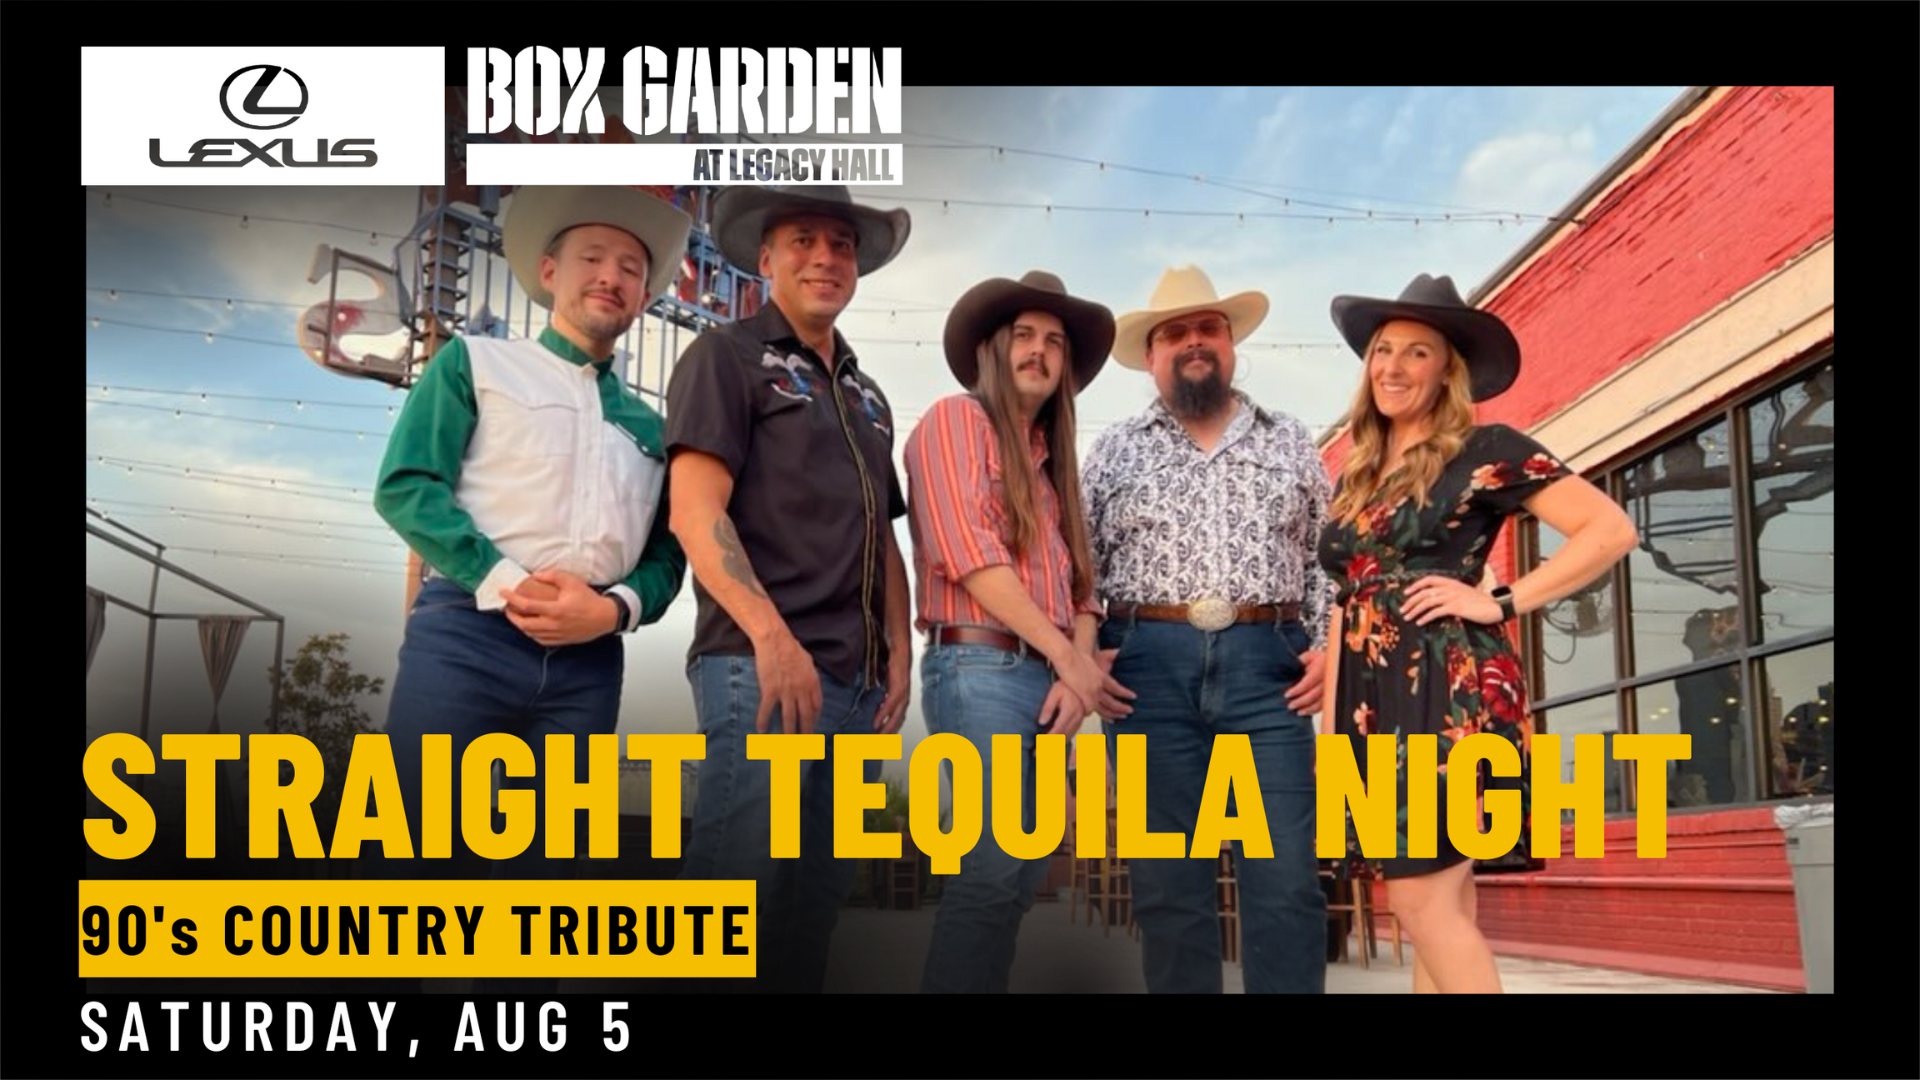 Straight Tequila Night at Lexus Box Garden at Legacy Hall